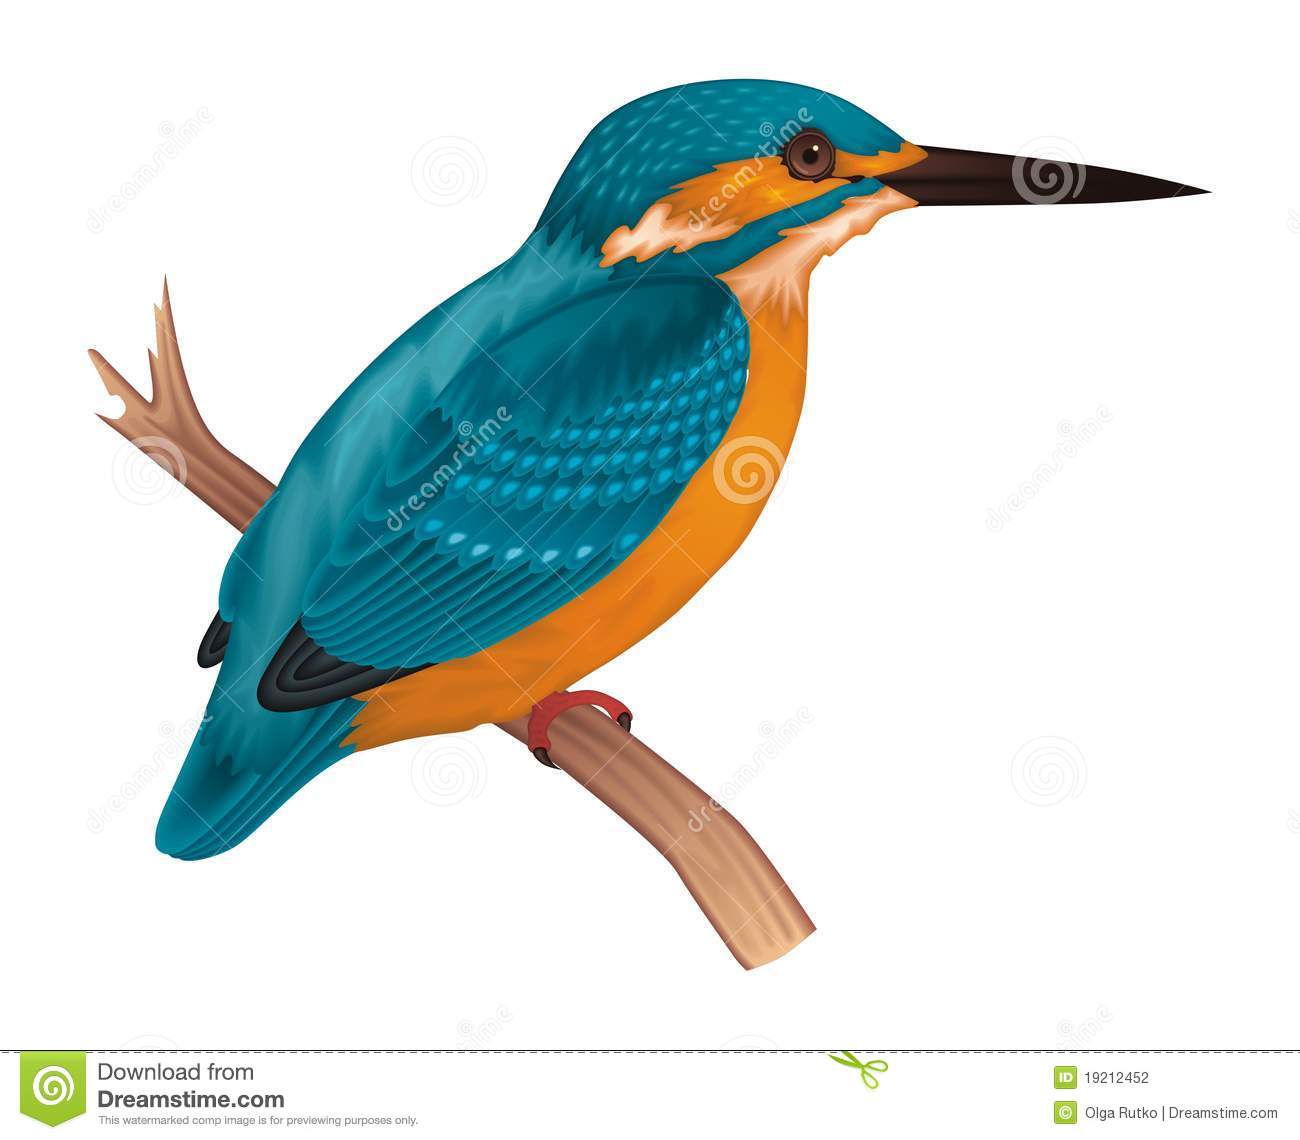 Kingfisher clipart #1, Download drawings